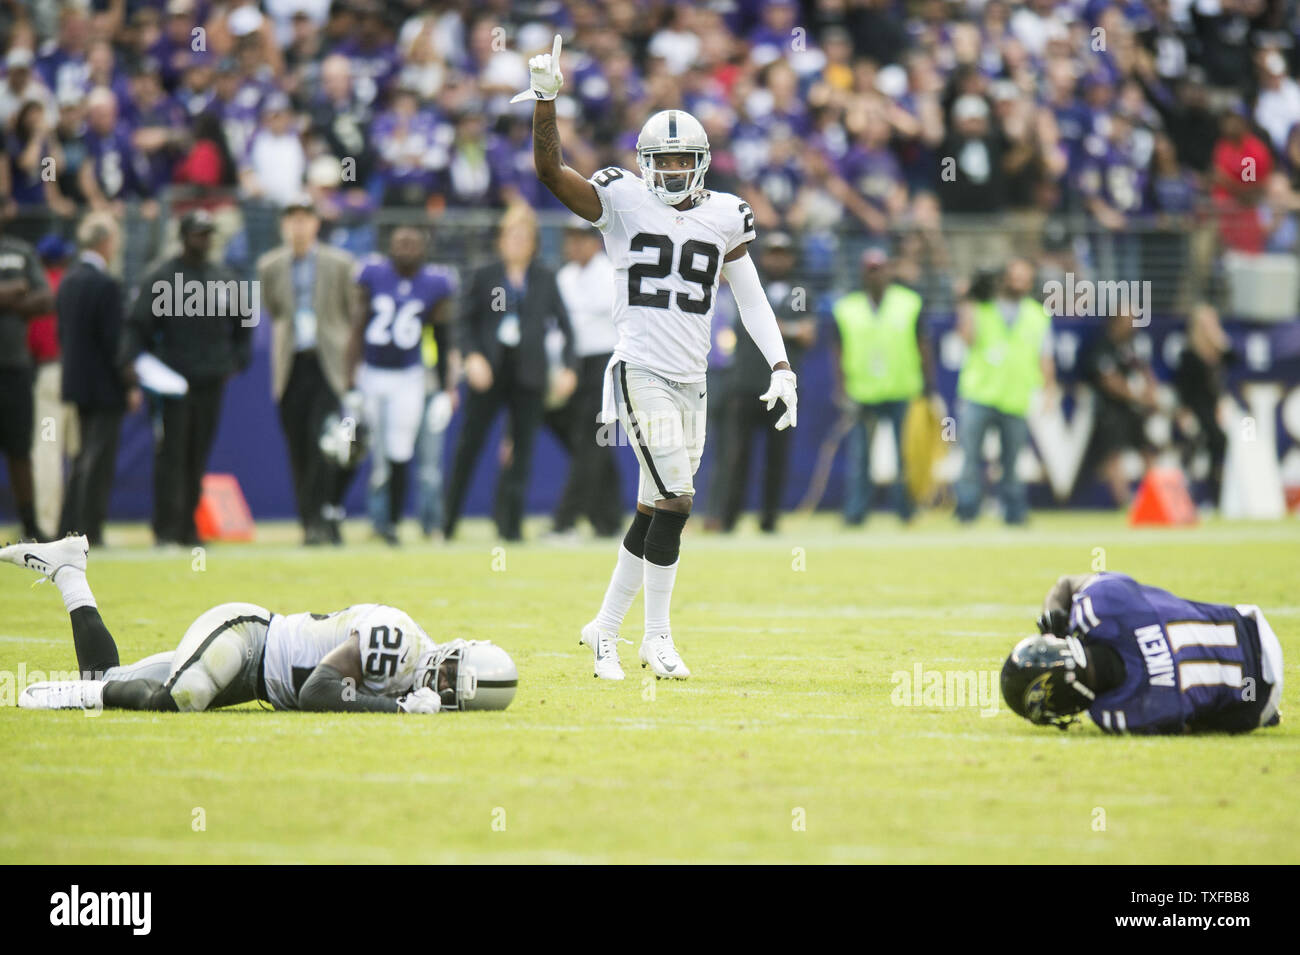 Oakland Raiders cornerback David Amerson starts to celebrate a win as the Raiders stop the Ravens with time running out in the fourth quarter at M&T Bank Stadium in Baltimore, Maryland on October 2, 2016. The Raiders won the game 28-27.      Photo by Pete Marovich/UPI Stock Photo